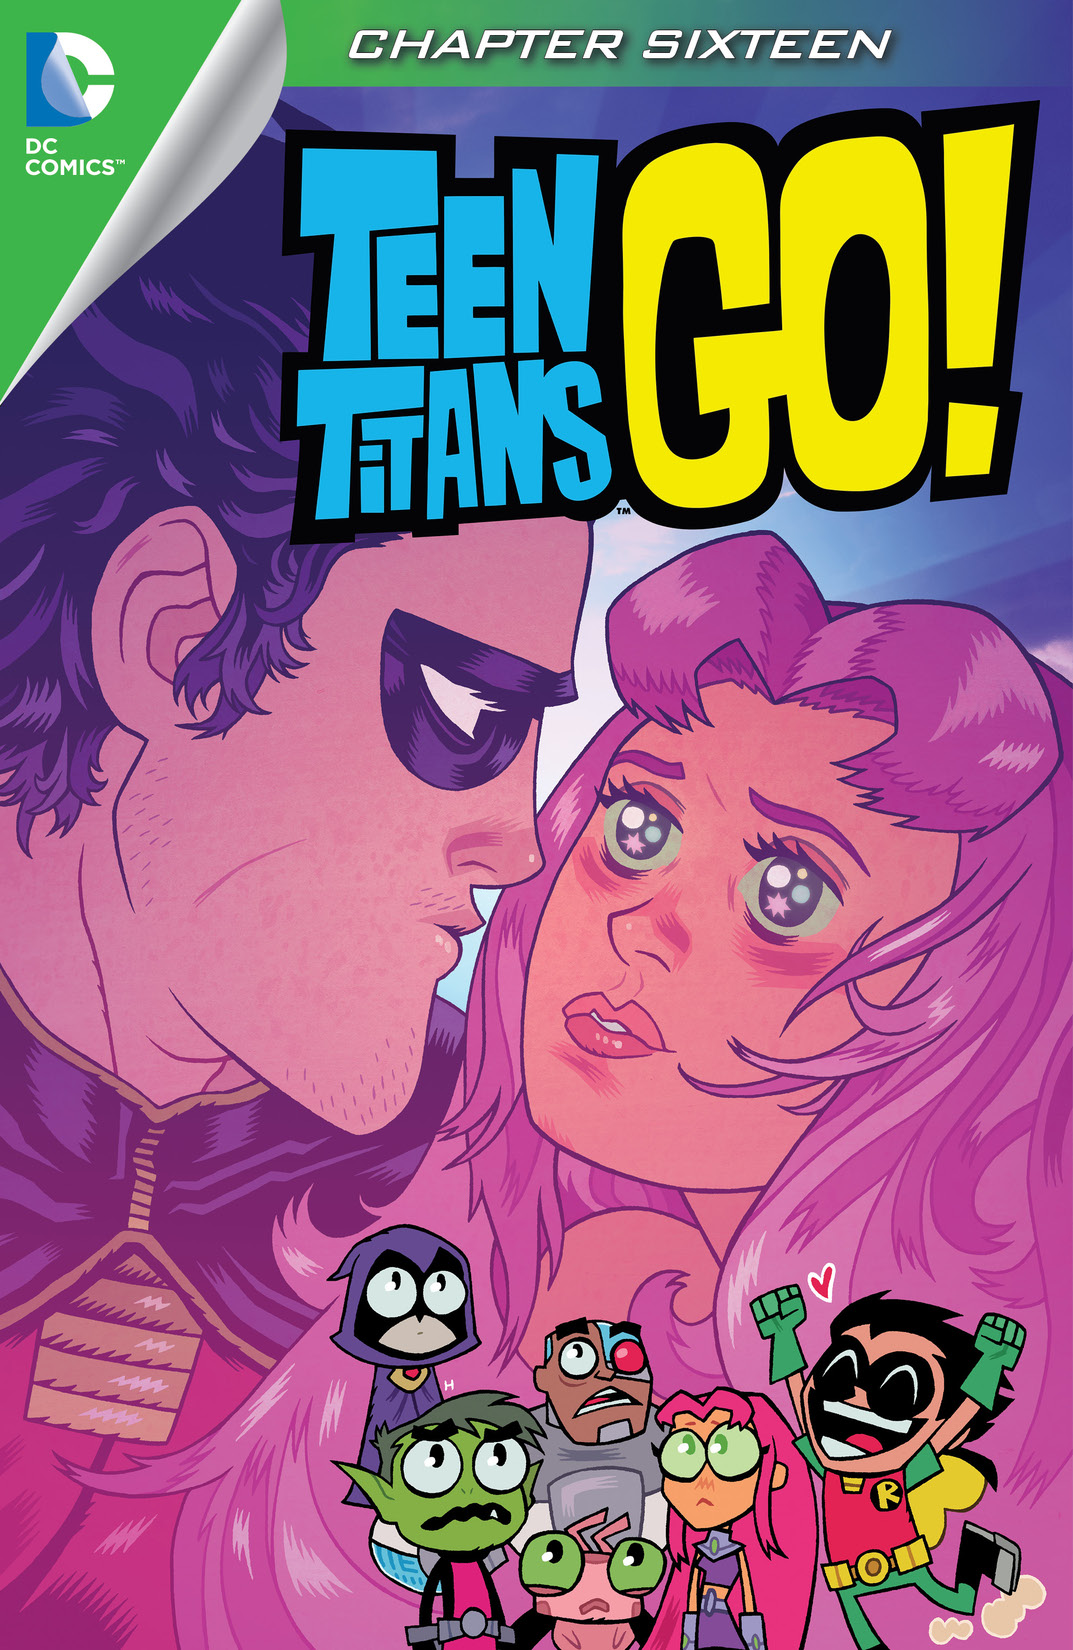 Teen Titans Go! (2013-) #16 preview images